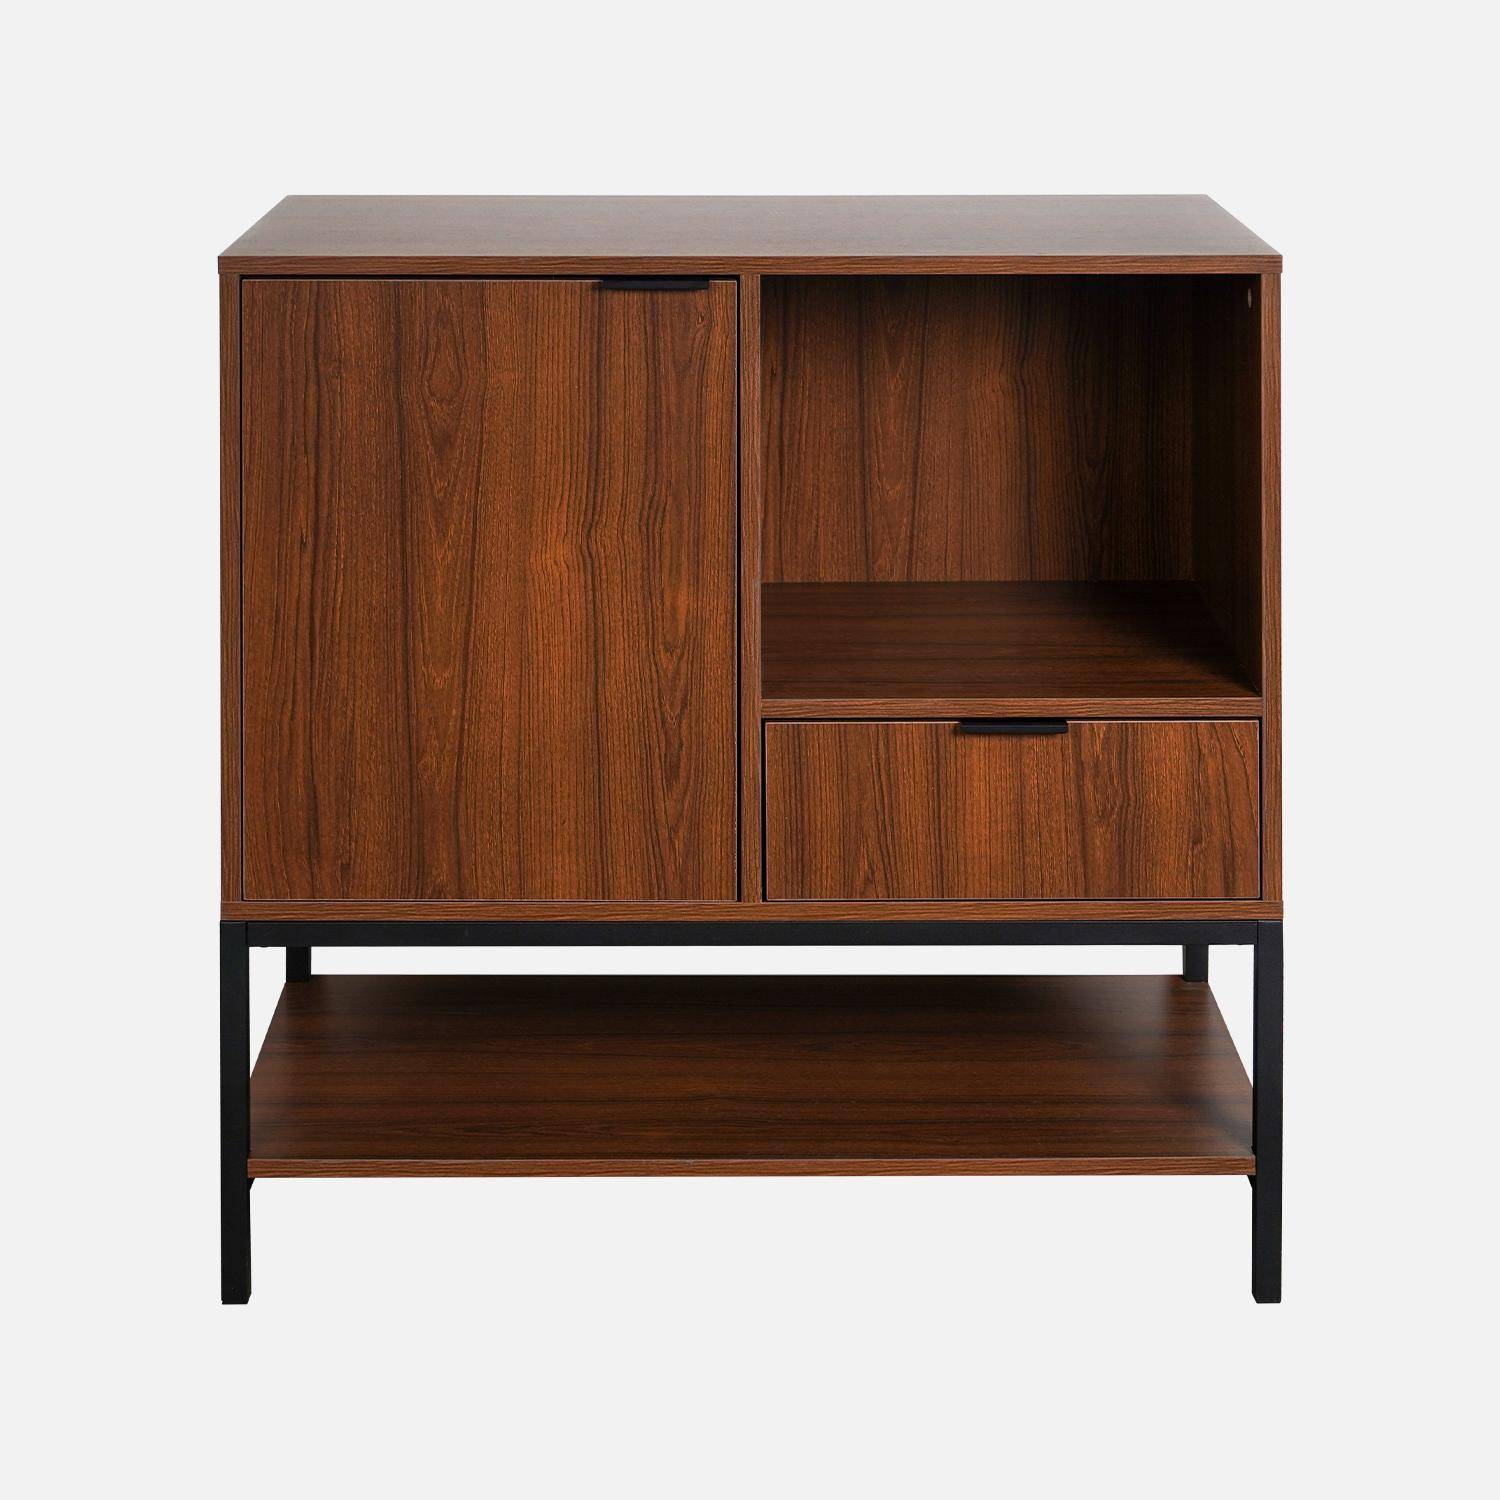 Low sideboard in walnut with black metal legs and handles - 1 door, 1 drawer and 2 shelves Photo2